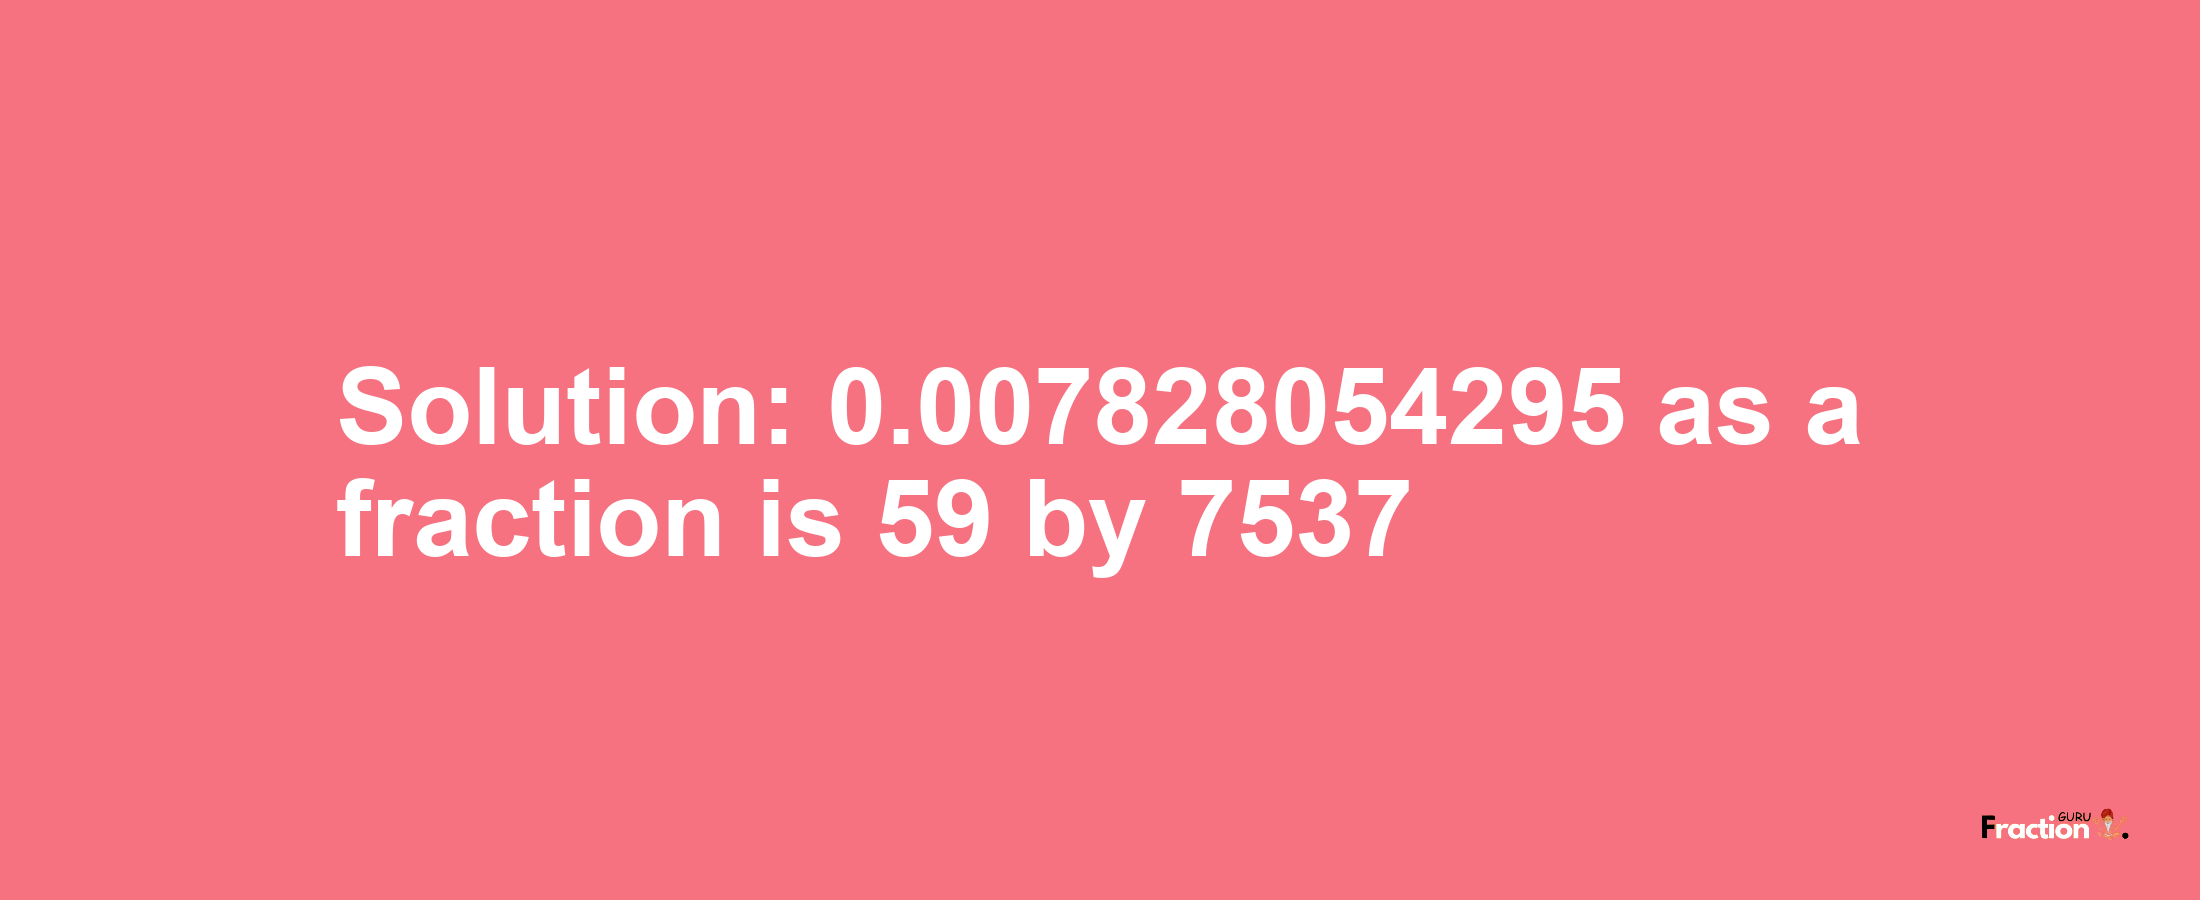 Solution:0.007828054295 as a fraction is 59/7537